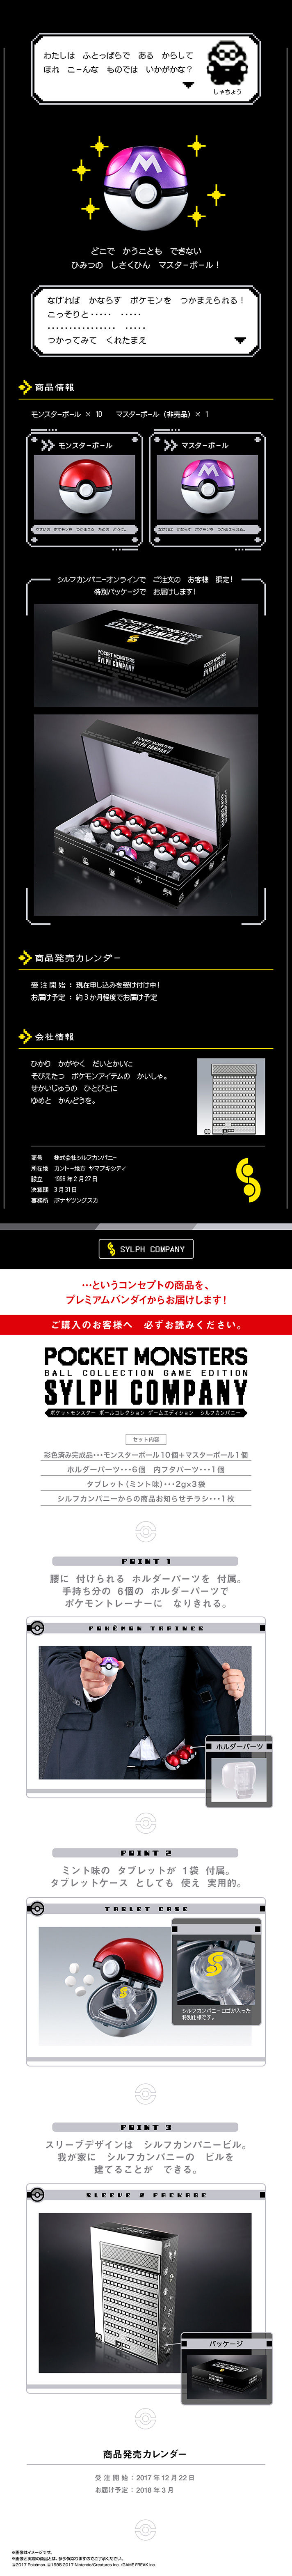 POCKET MONSTERS BALL COLLECTION（ポケットモンスターボールコレクション） GAME EDITION SYLPH  COMPANY